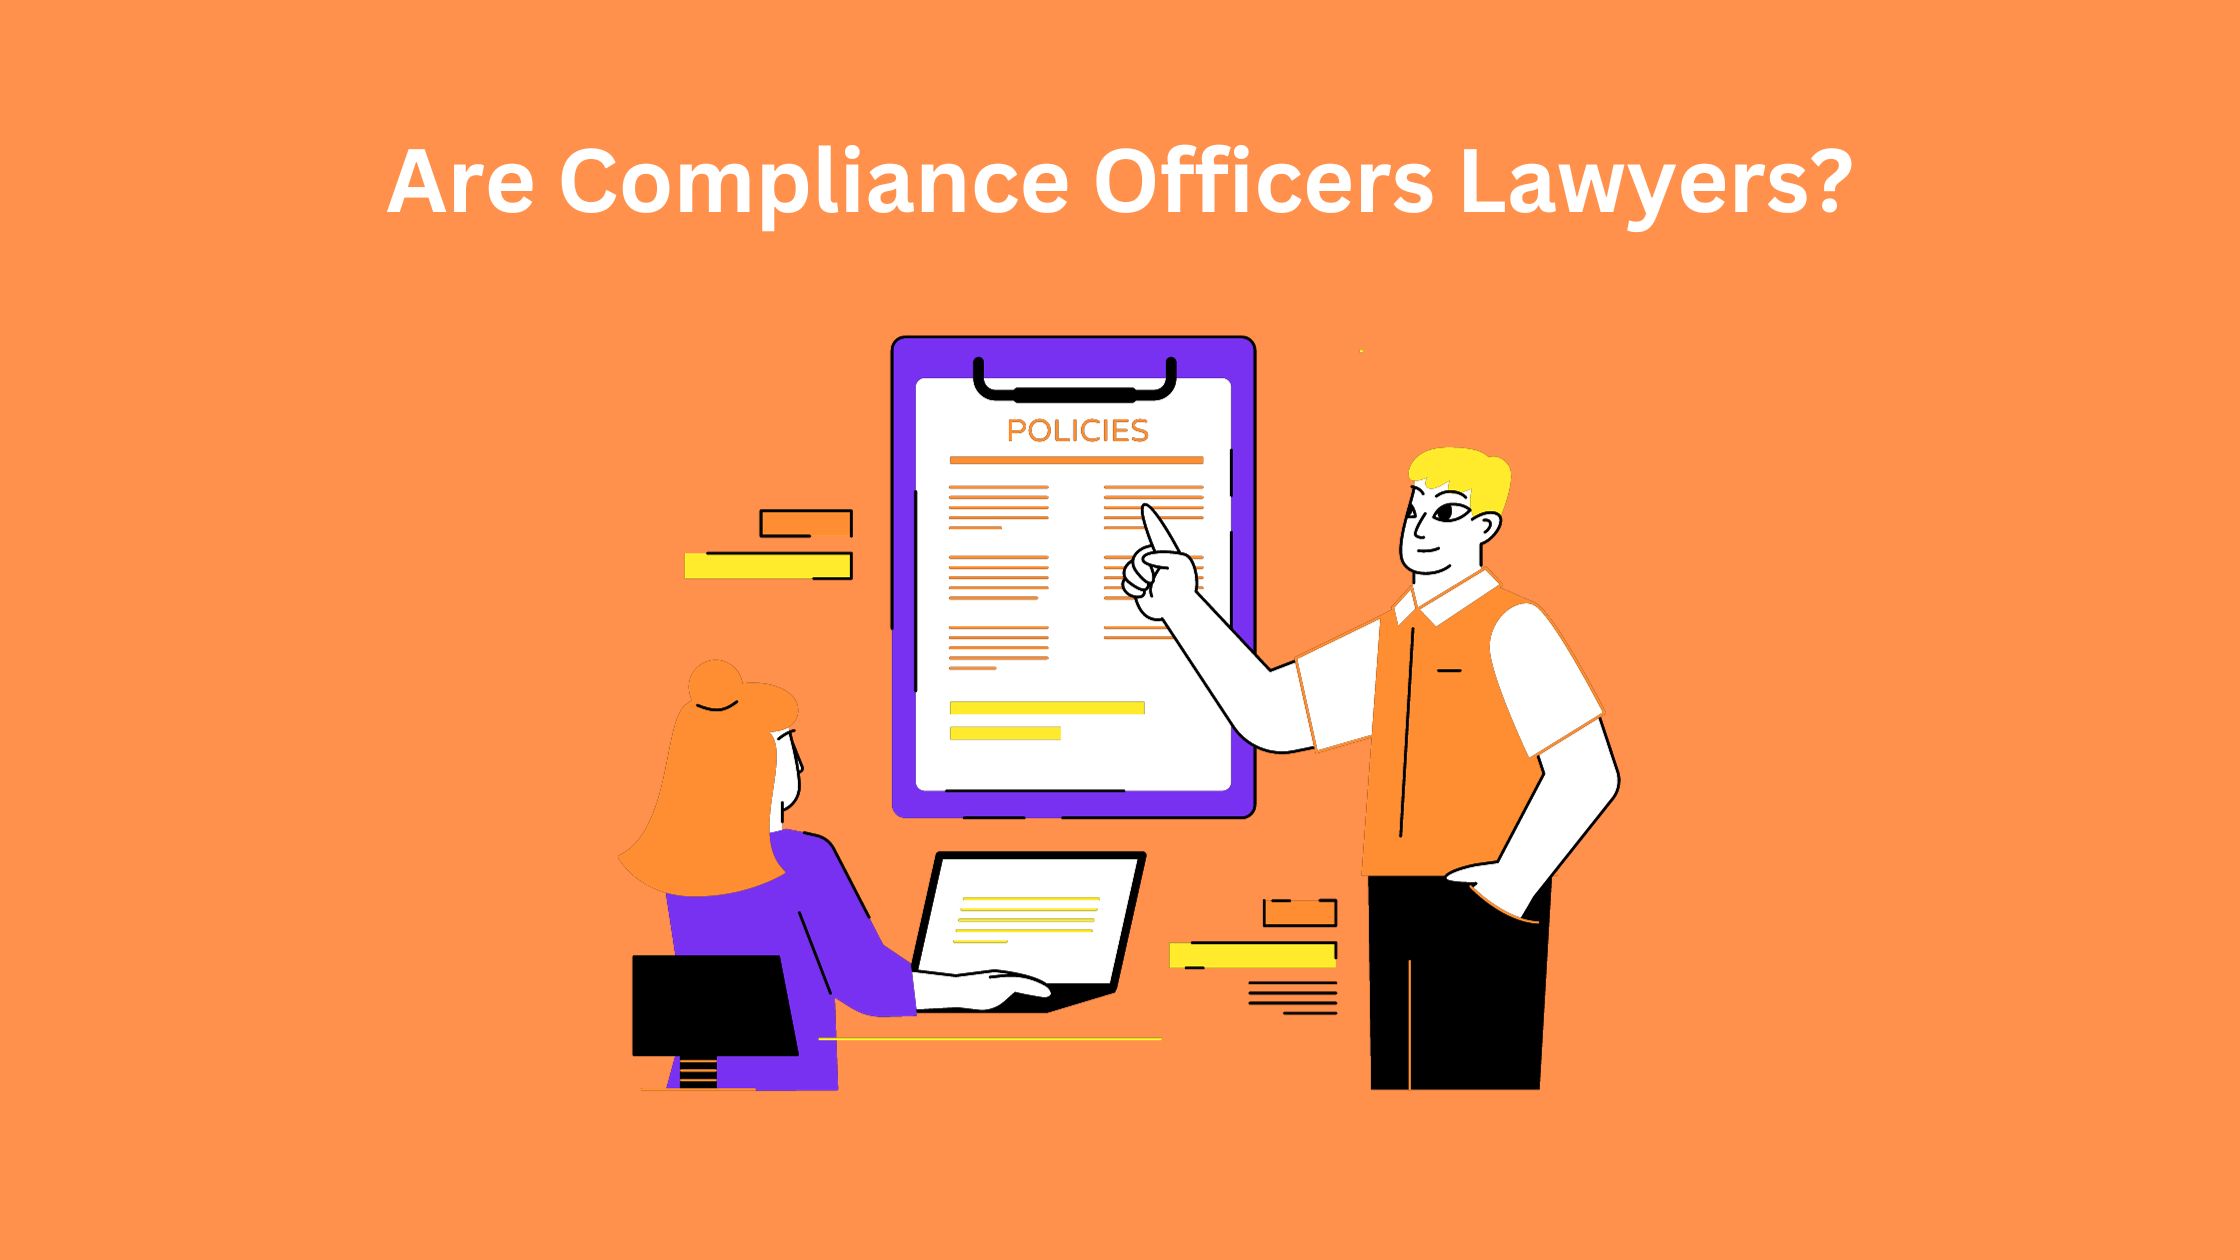 Are Compliance Officers Lawyers